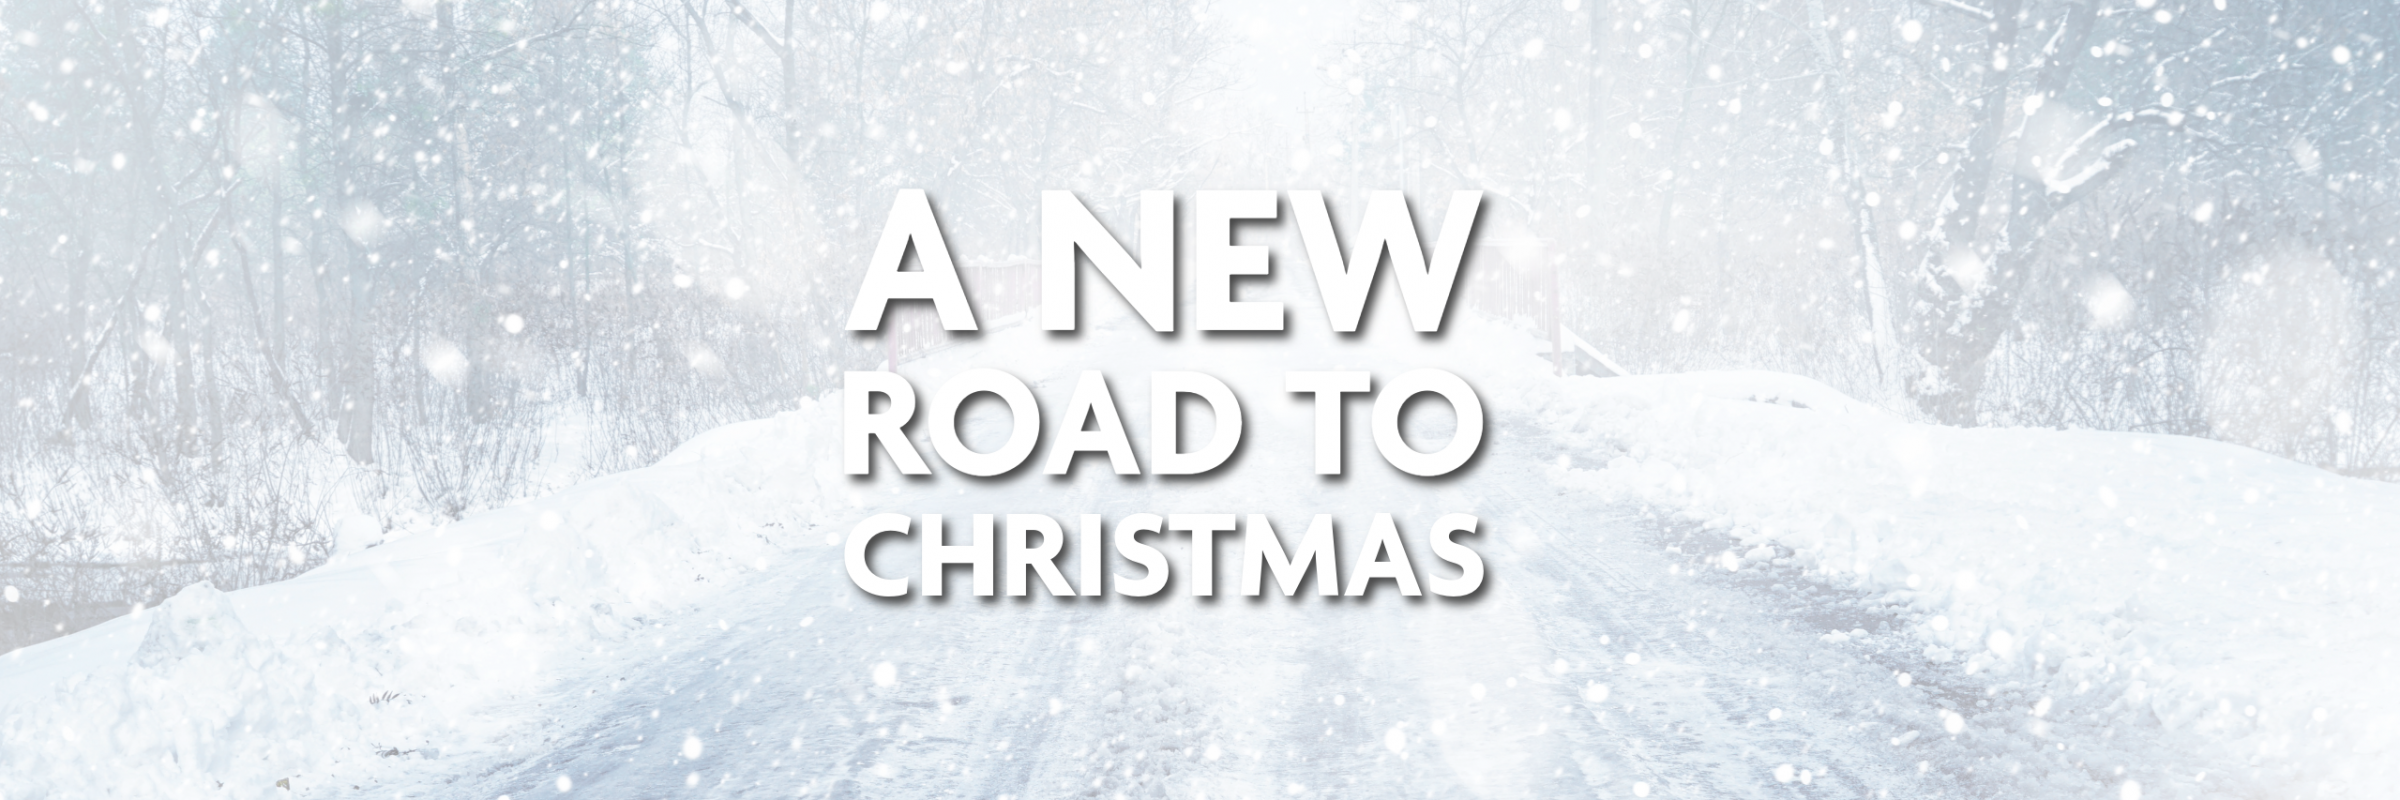 A New Road to Christmas HERO 1